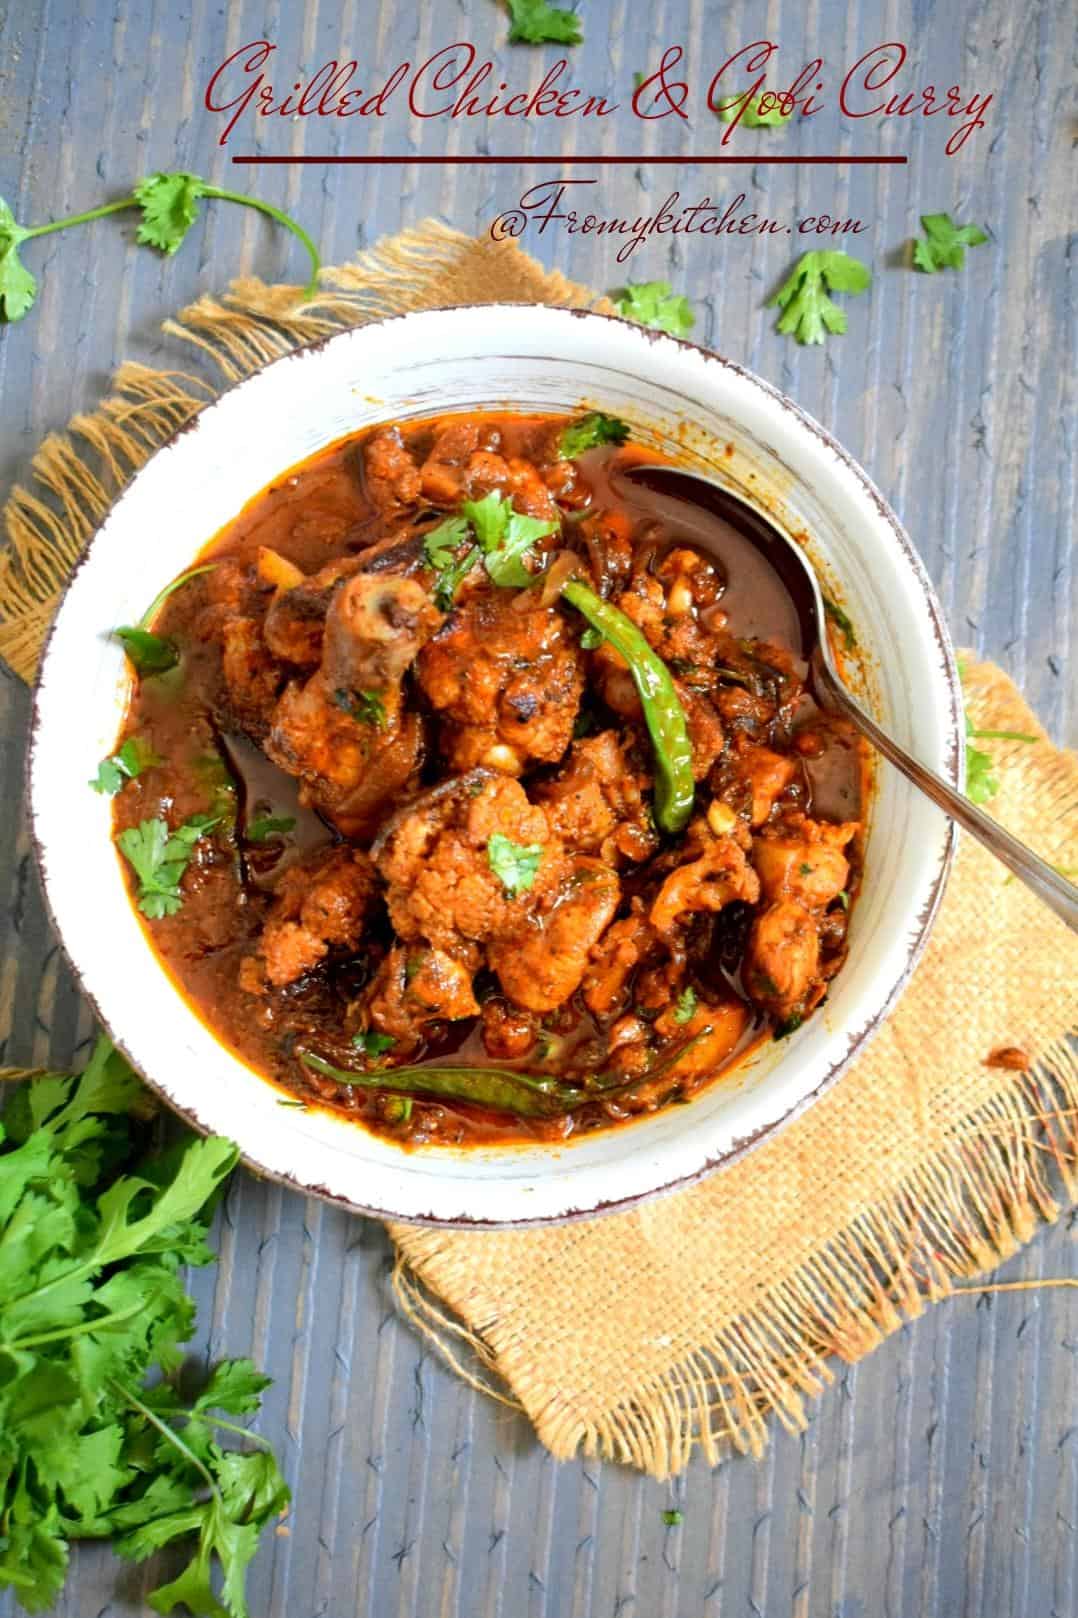 Delicious Chicken With Gobi Recipe – Perfect for Dinner!